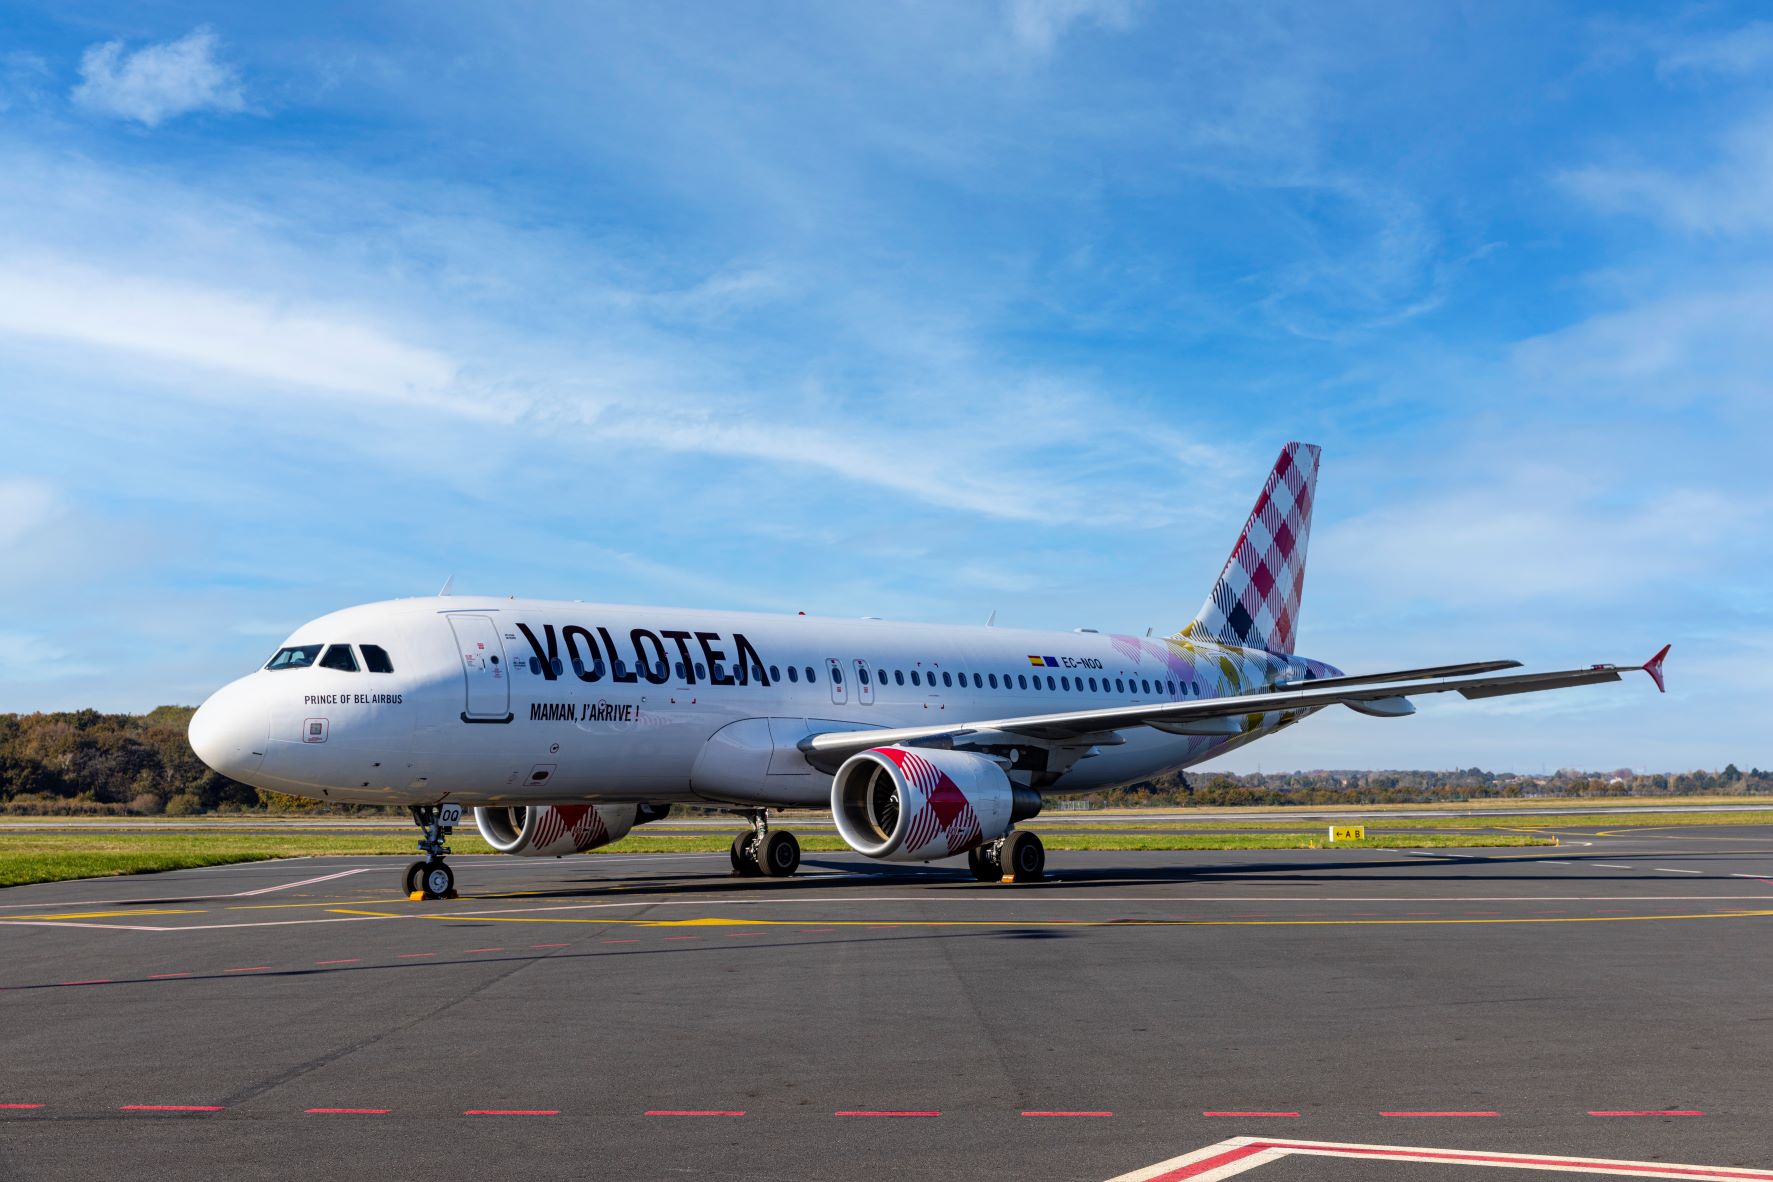 AFI KLM Engineering and Maintenance wins contract to maintain Volotea A320 aircraft